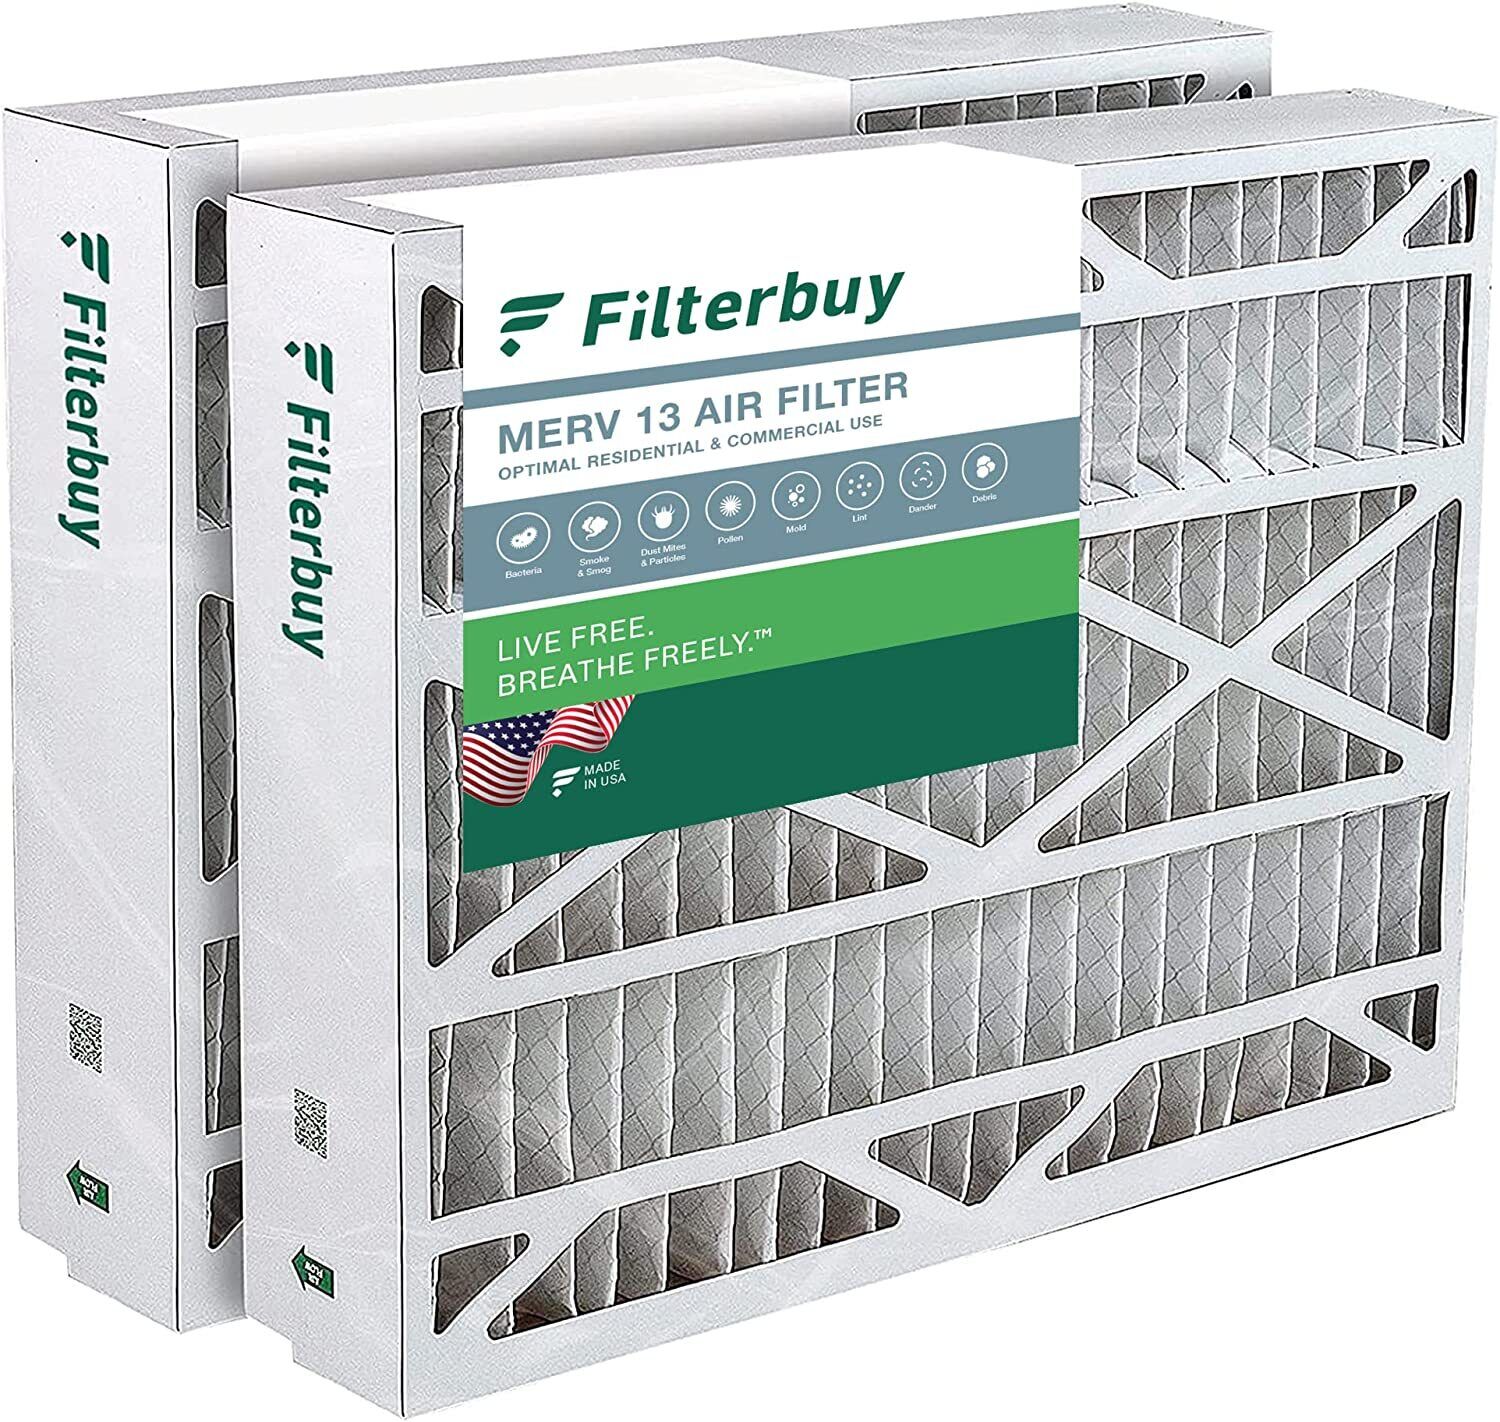 Filterbuy 24x25x5 Air Filter MERV 13, Pleated AC Furnace Replacement for Carrier